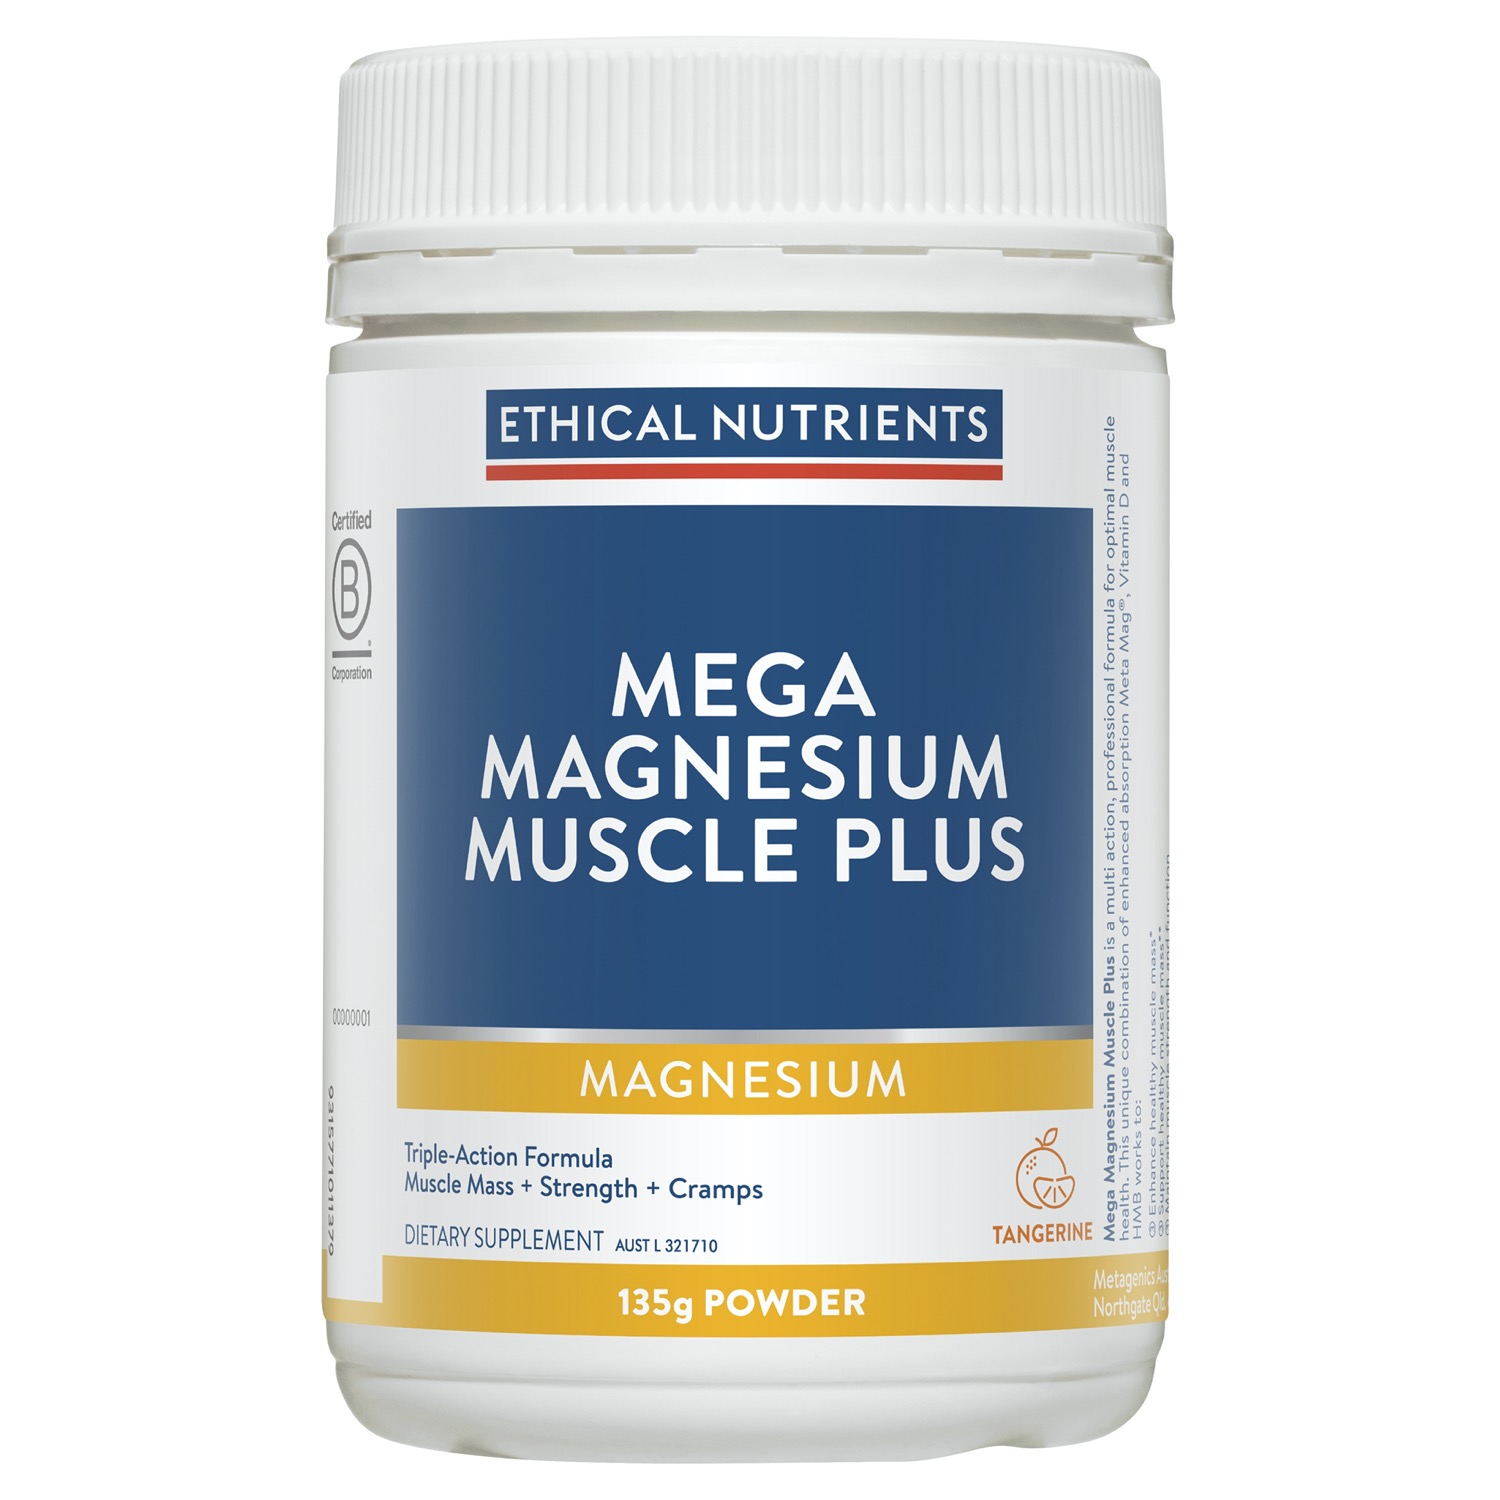 Ethical Nutrients Magnesium Muscle Plus 135g